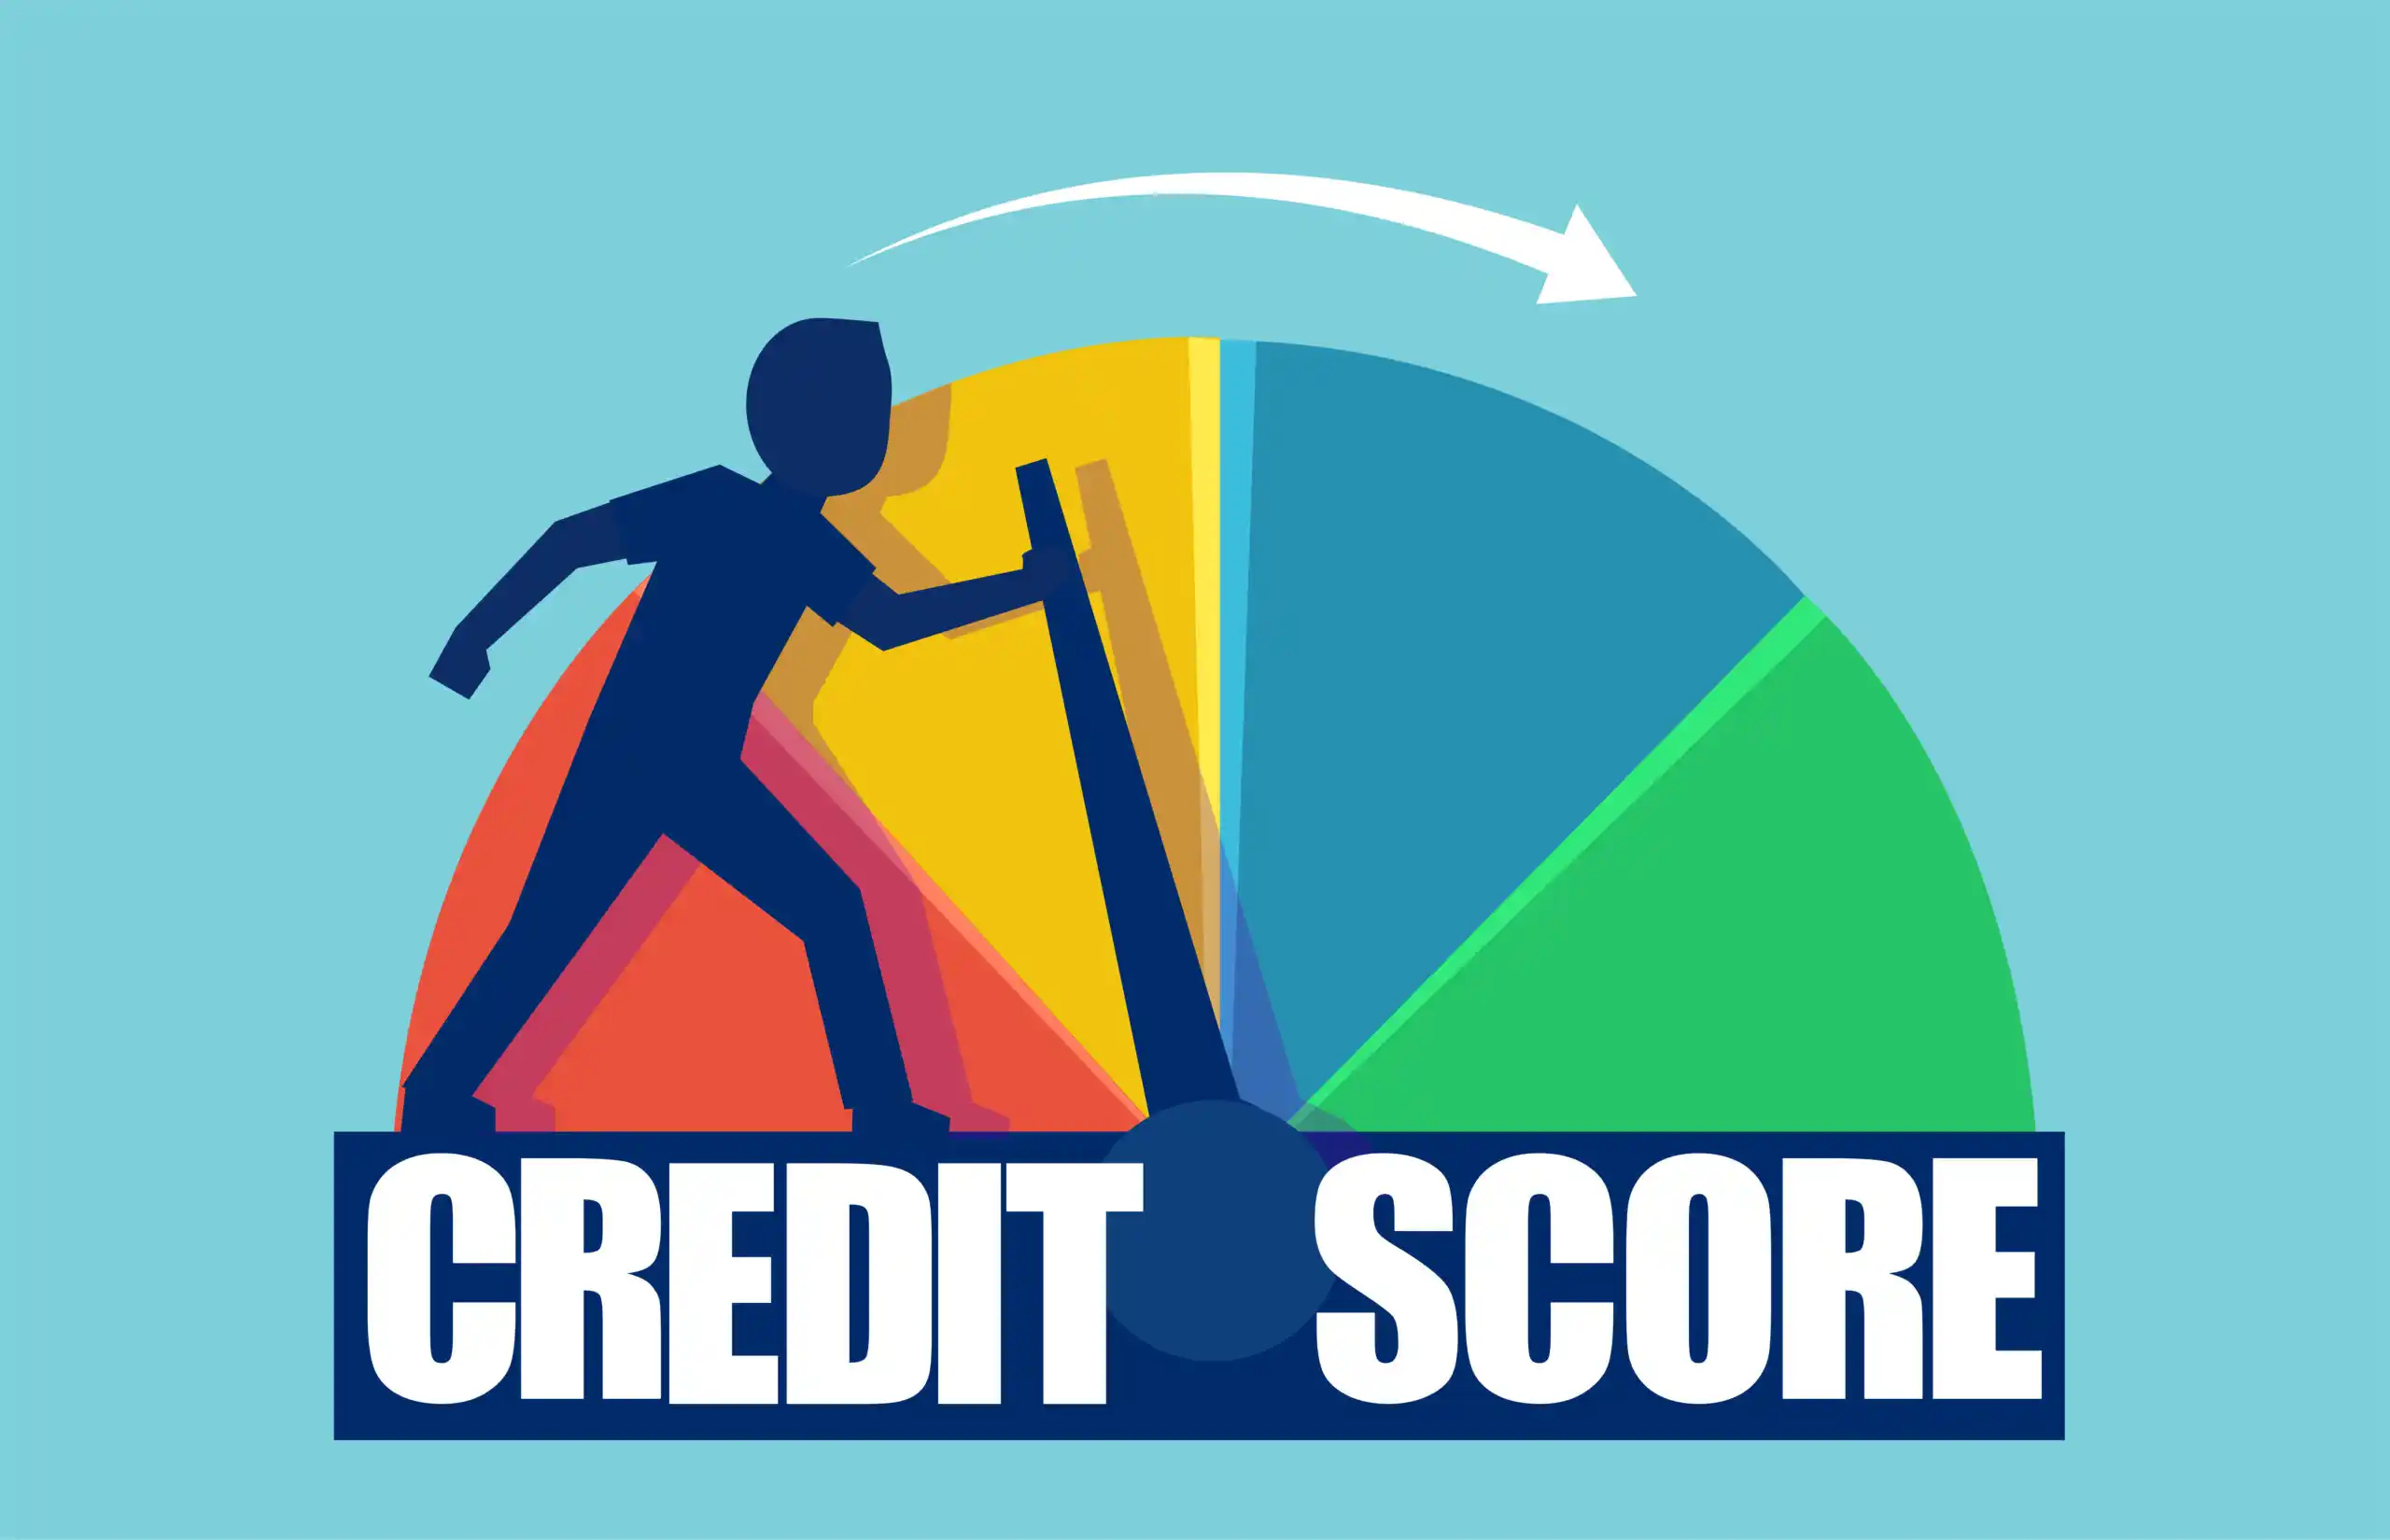 How Exactly is Your Credit Score Calculated?